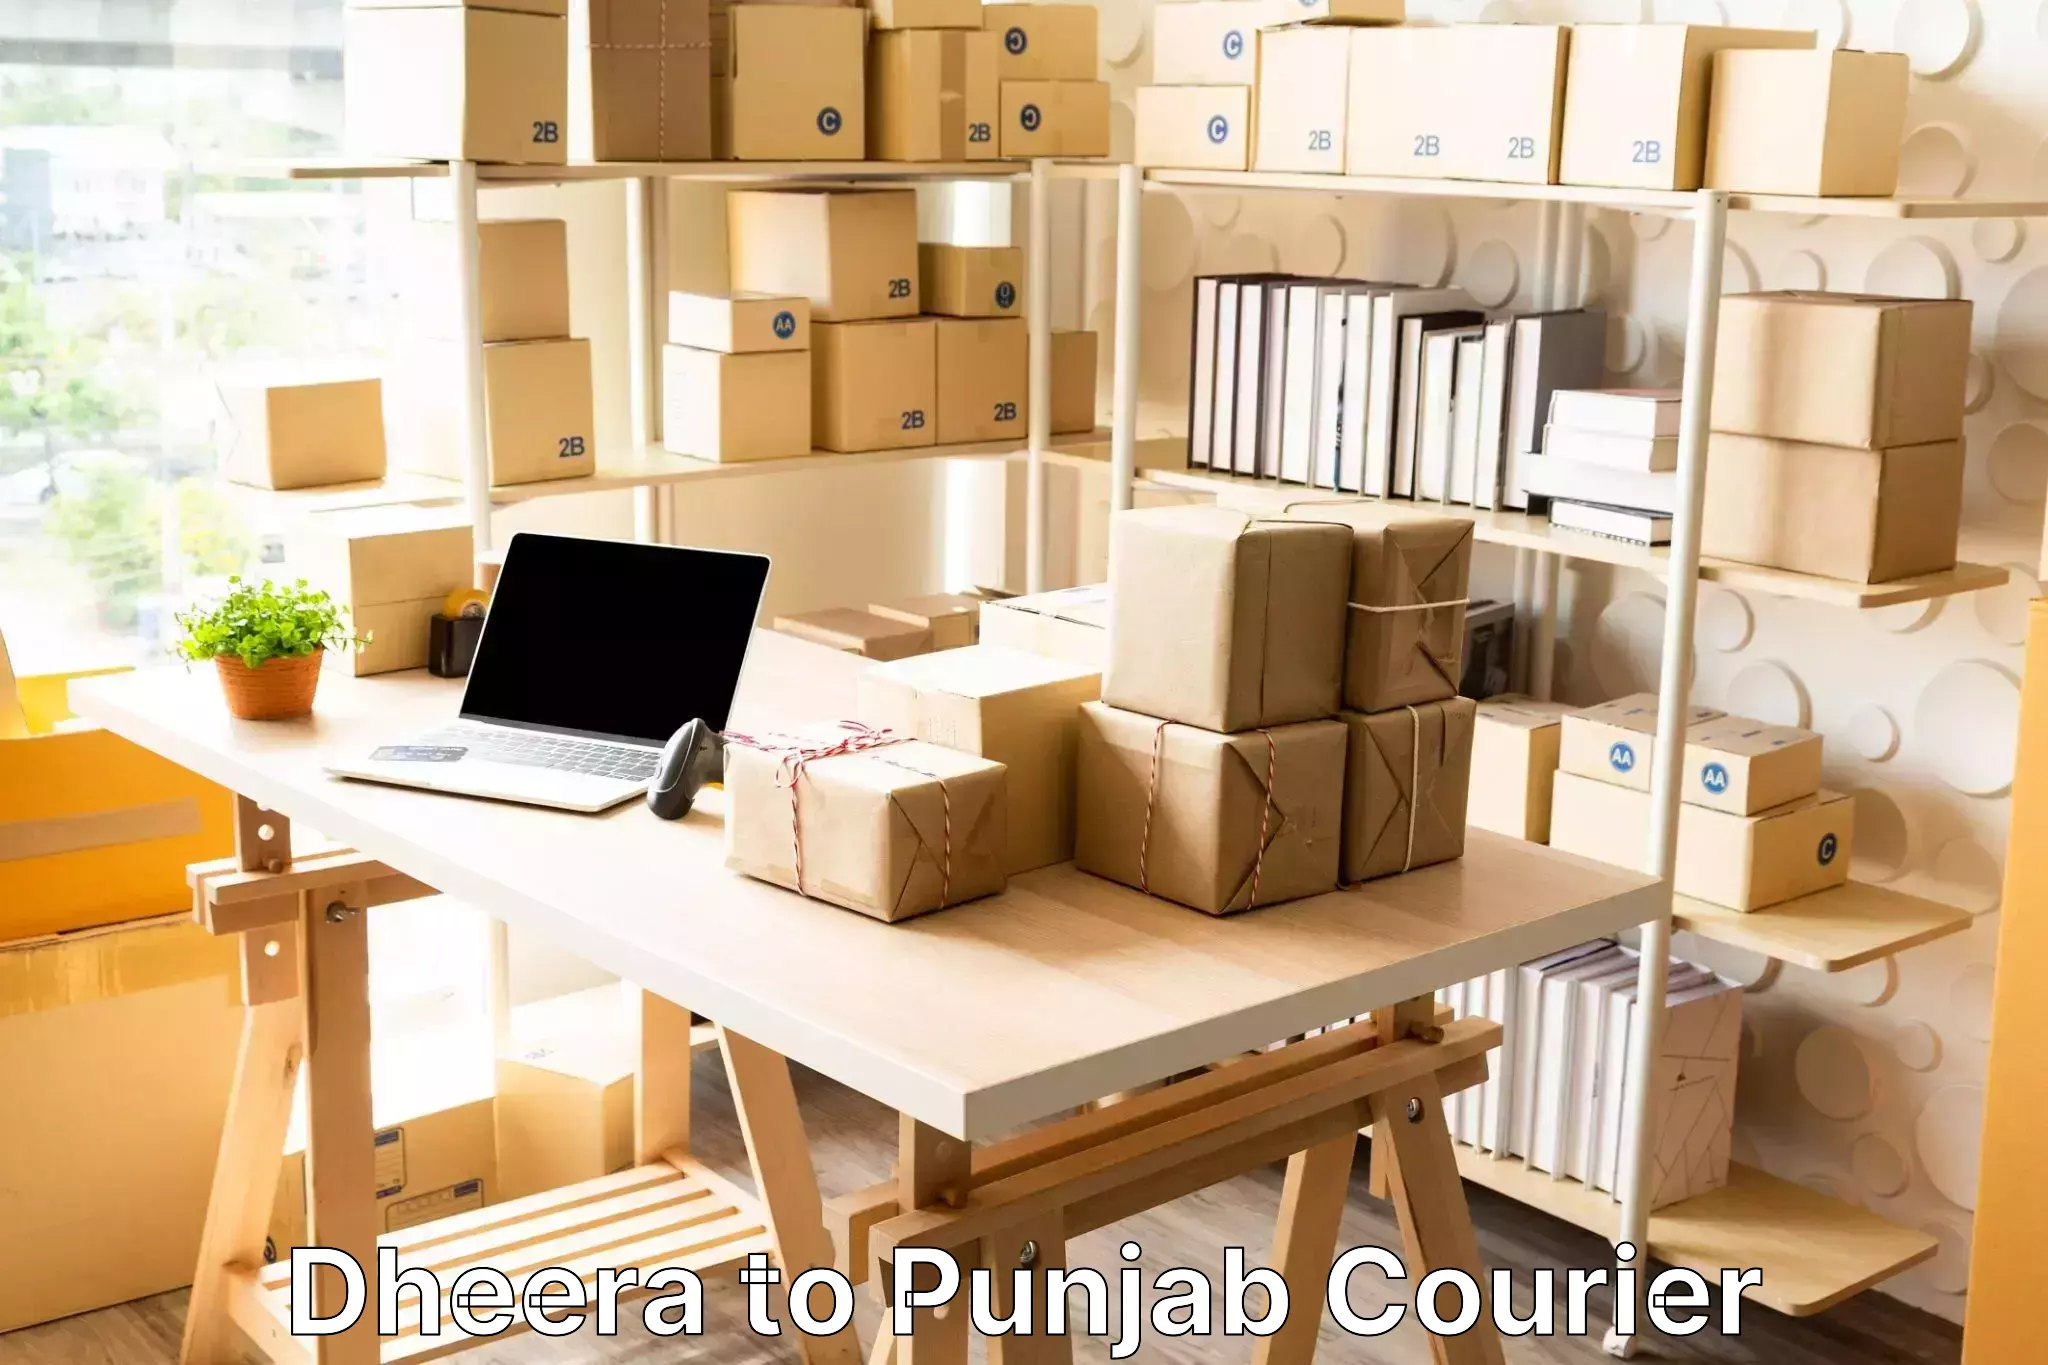 Baggage delivery scheduling Dheera to Punjab